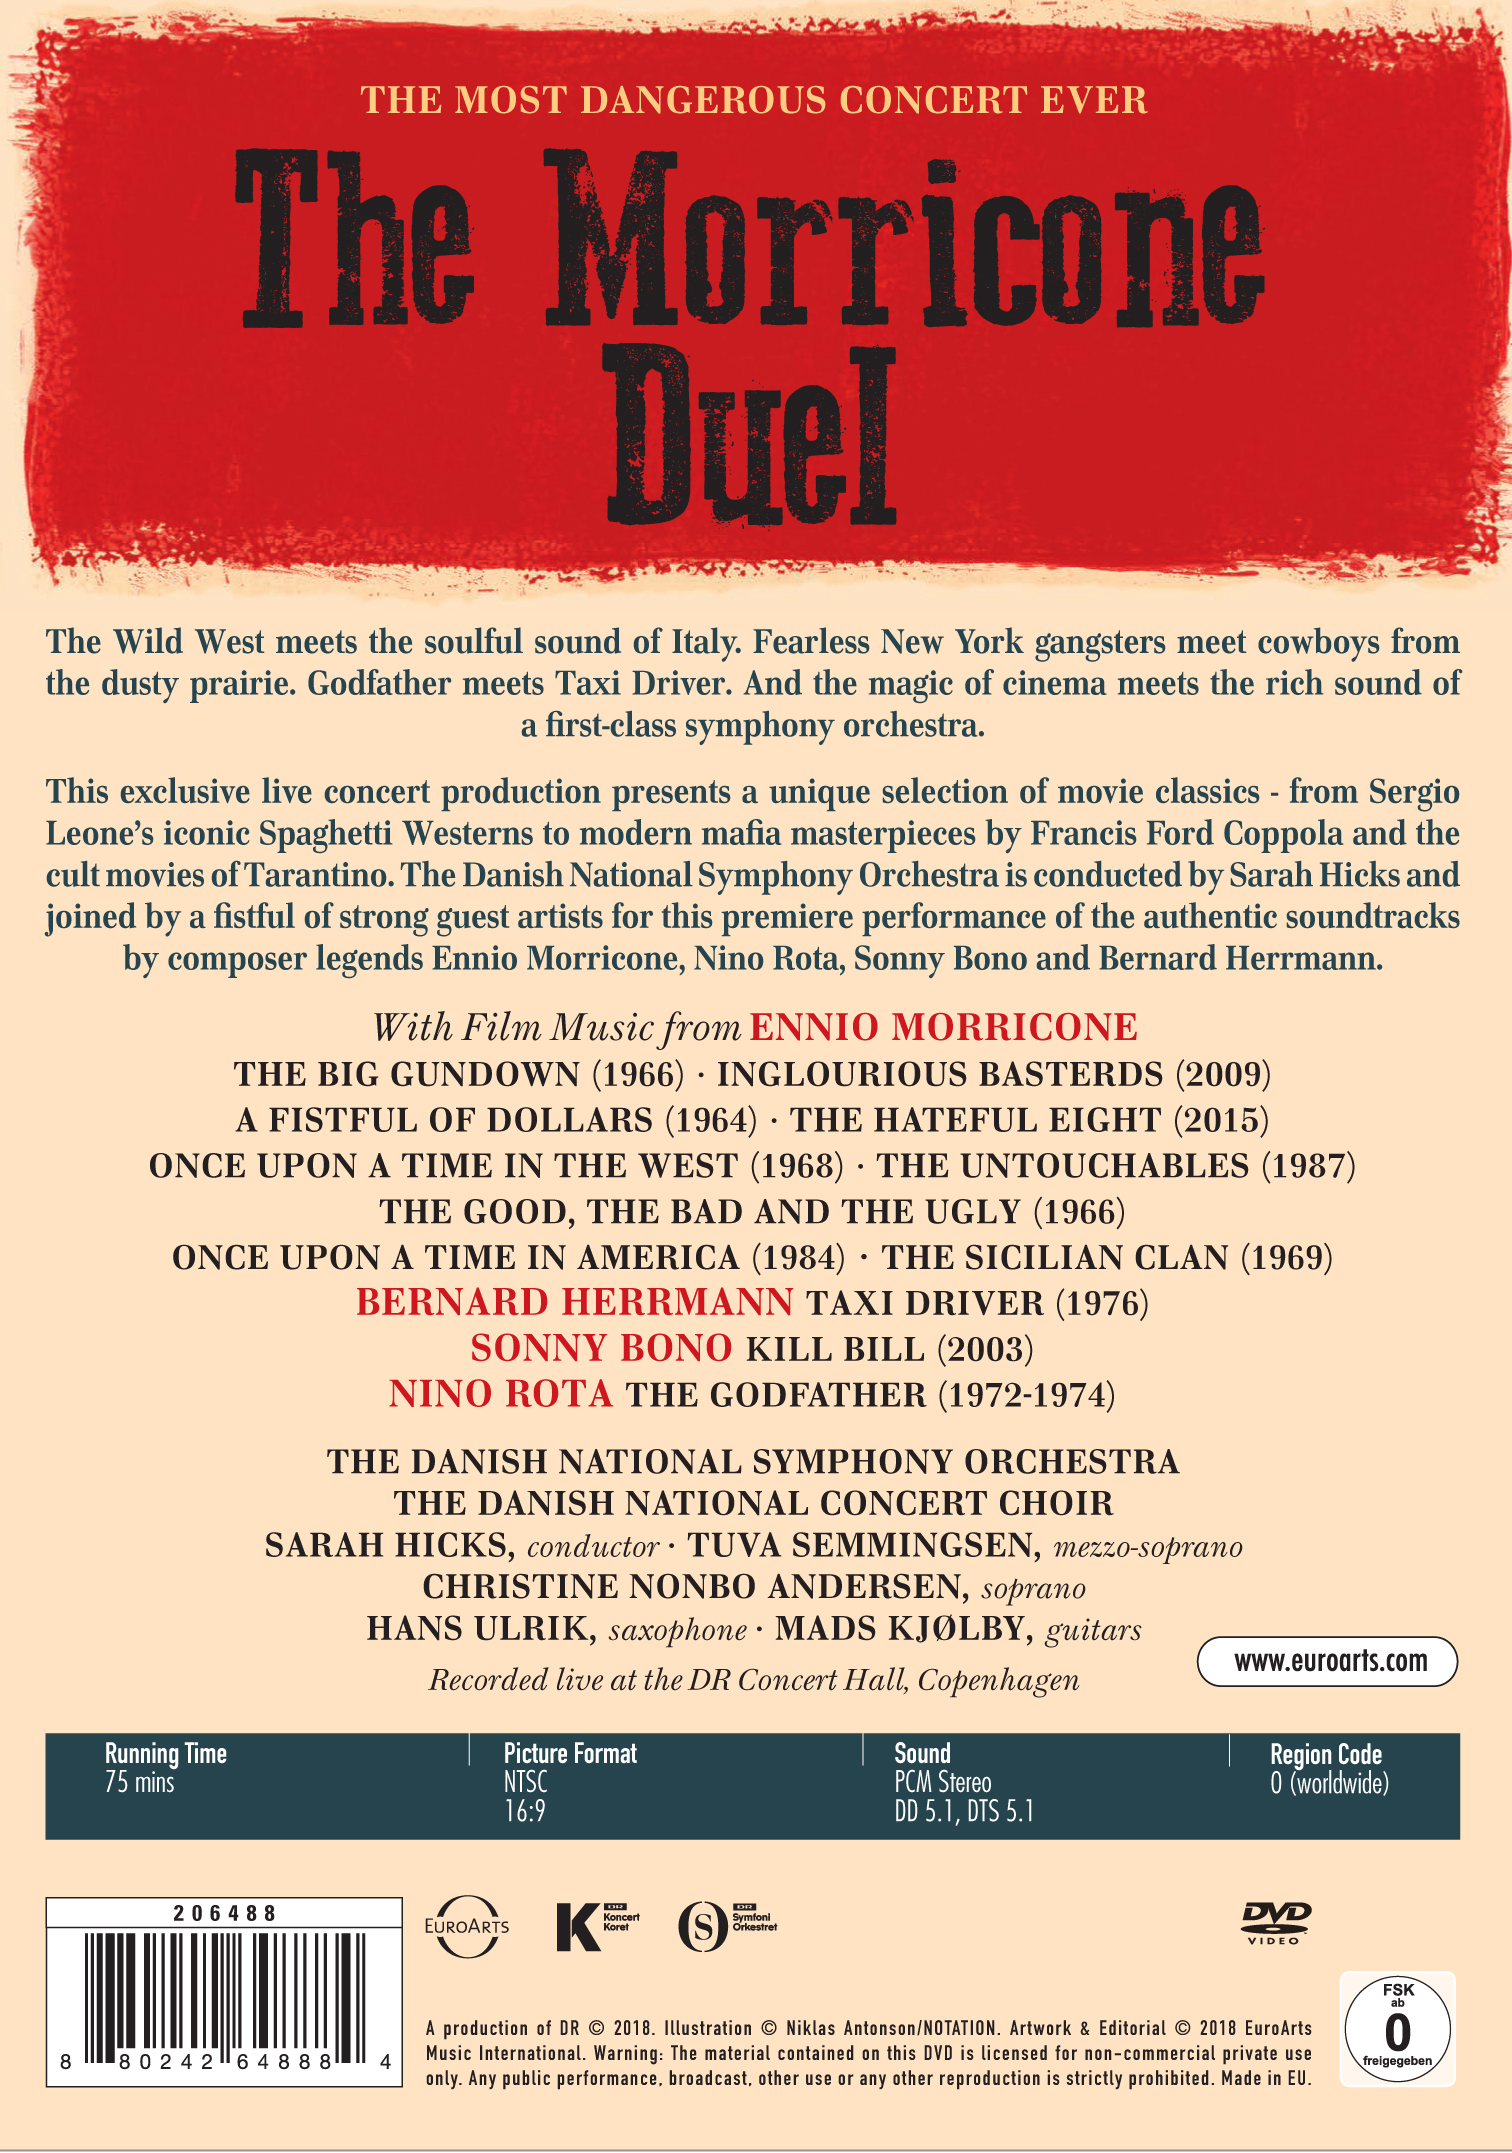 The Morricone Duel - The most dangerous concert ever - EUROARTS